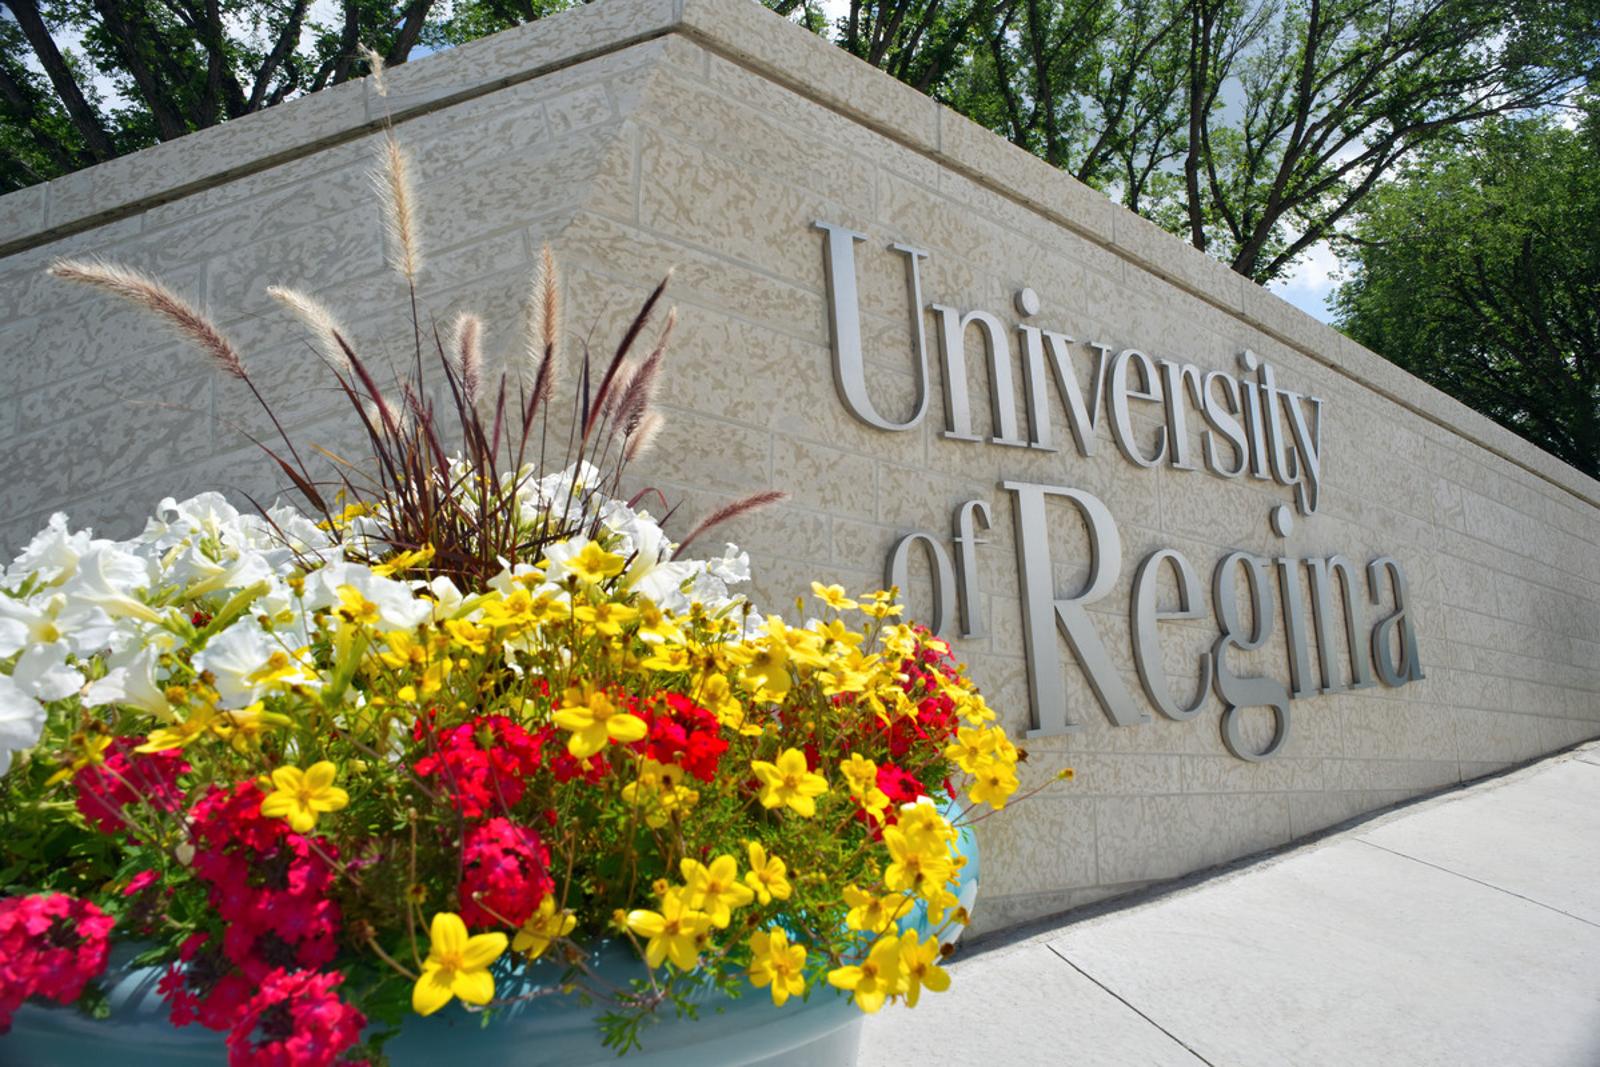 U of R sign with flowers in front